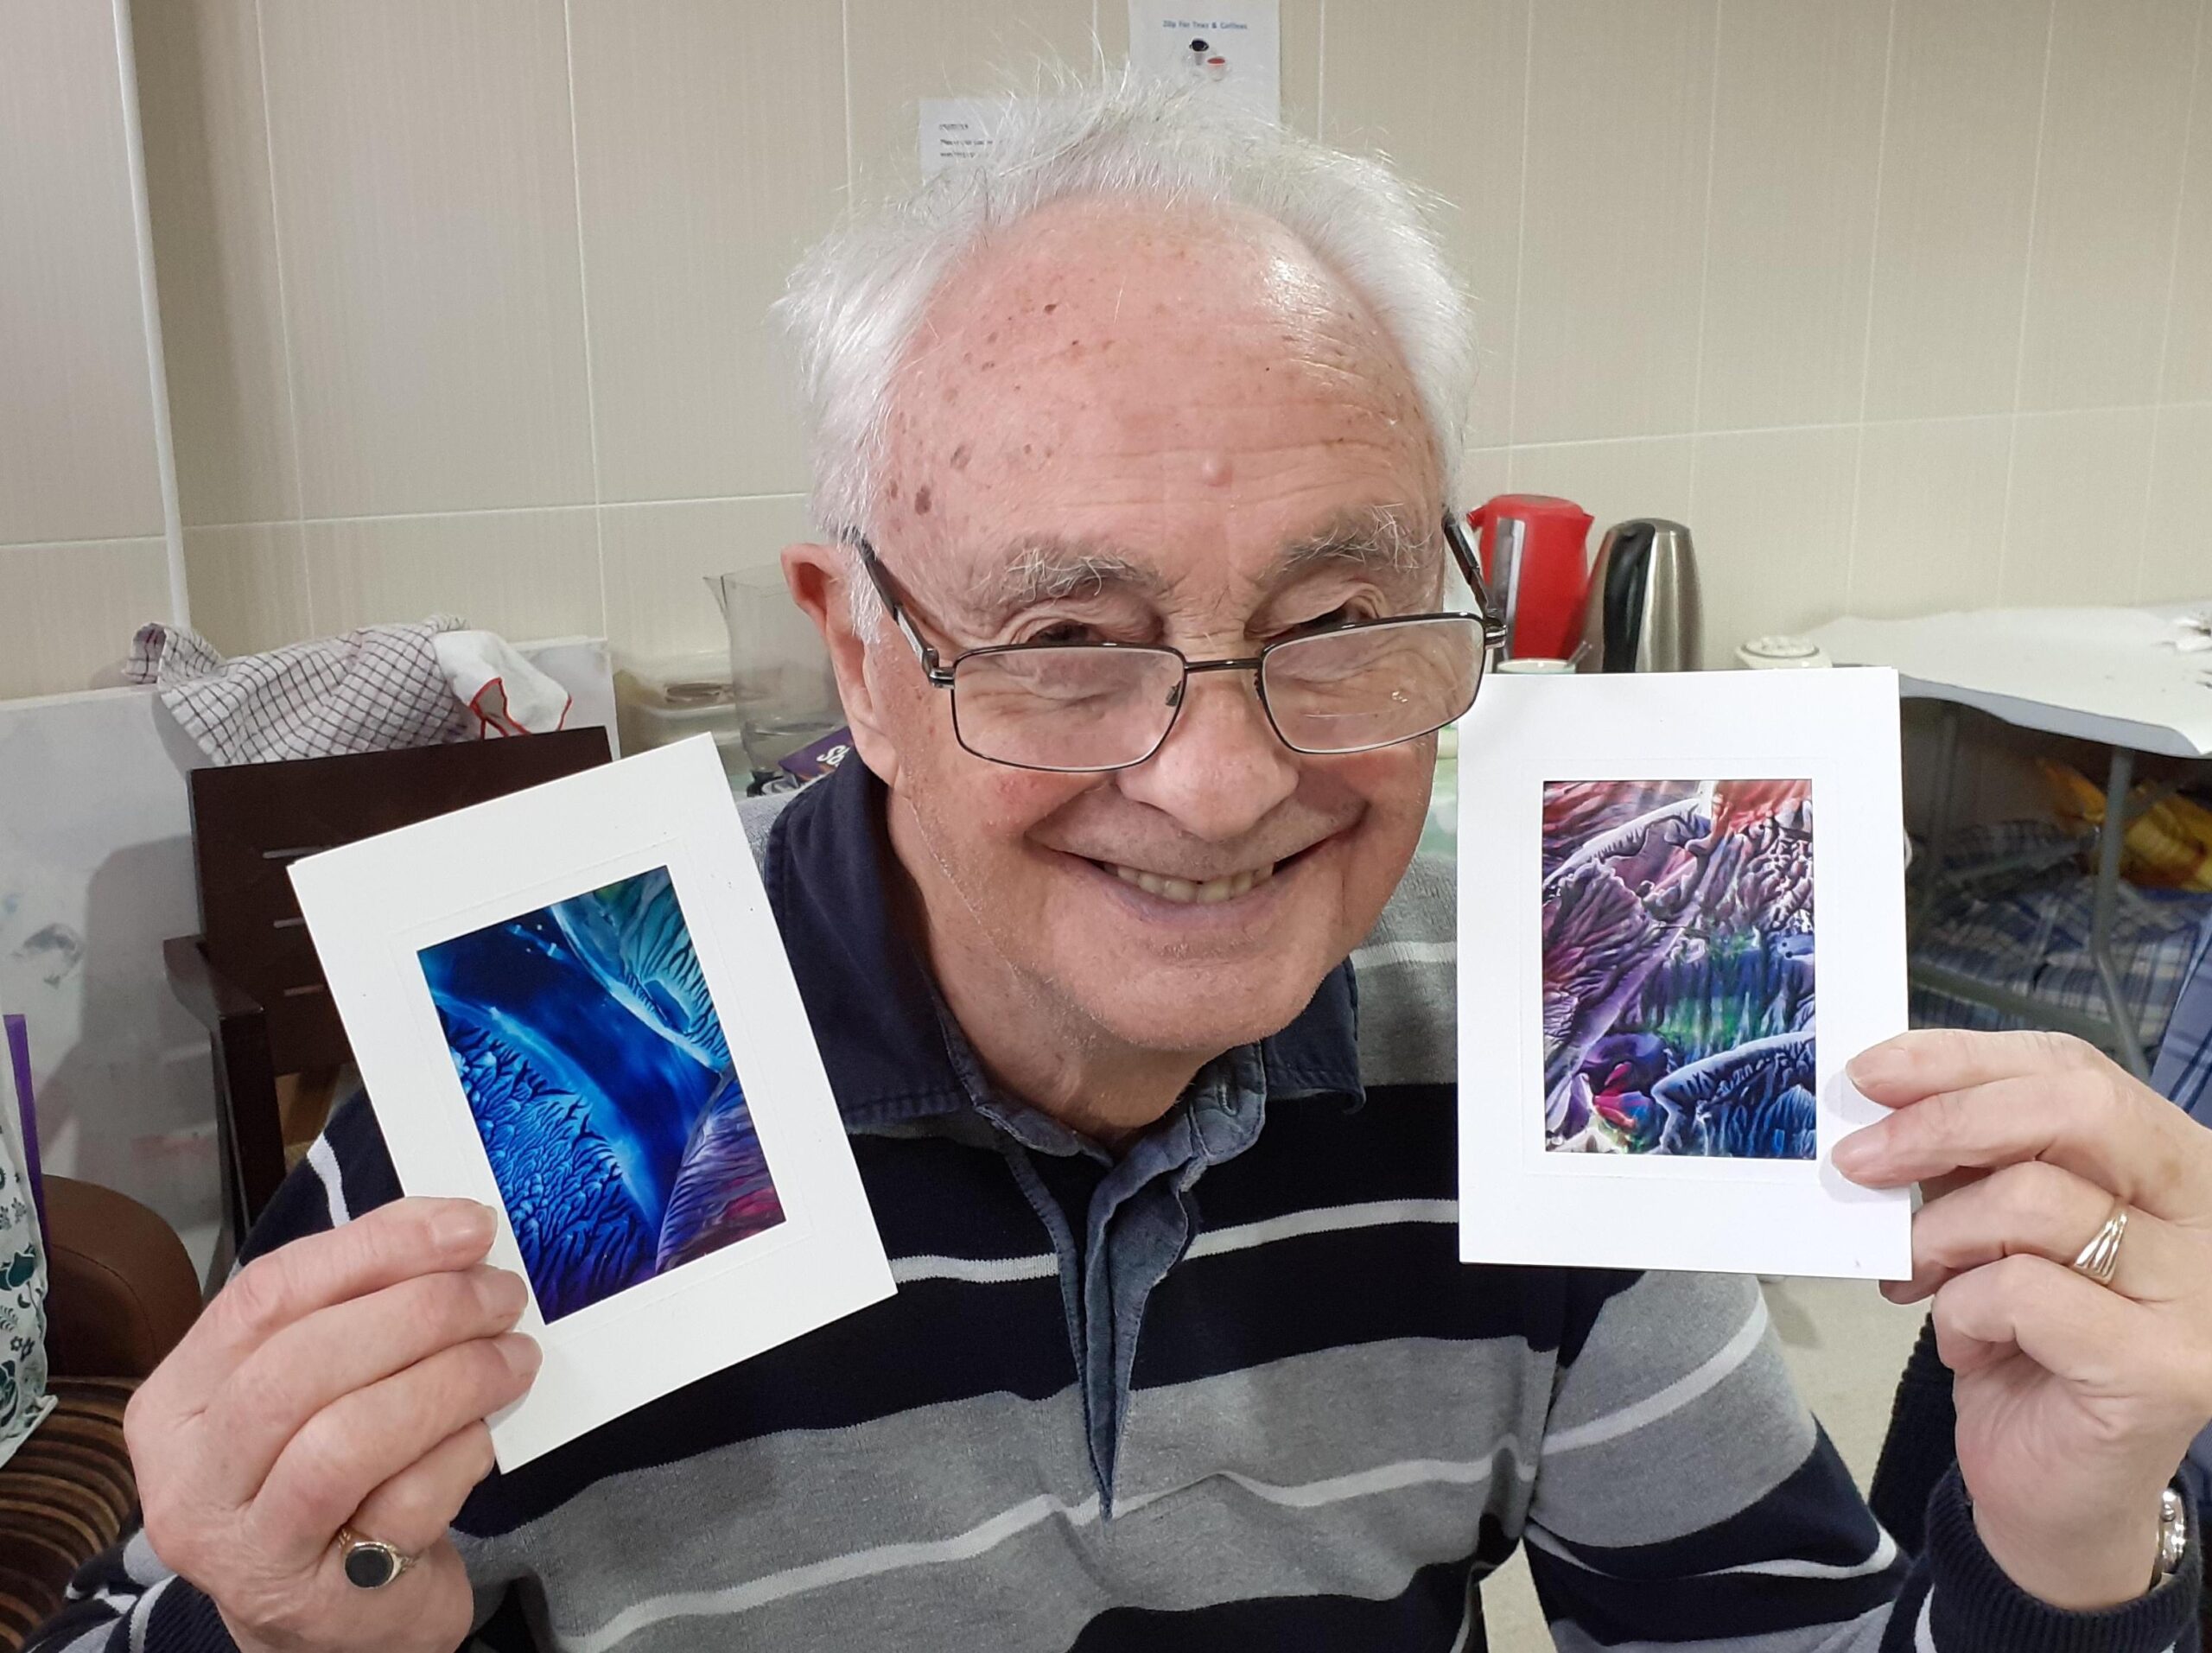 Old man sitting holding up two paintings smiling in a room